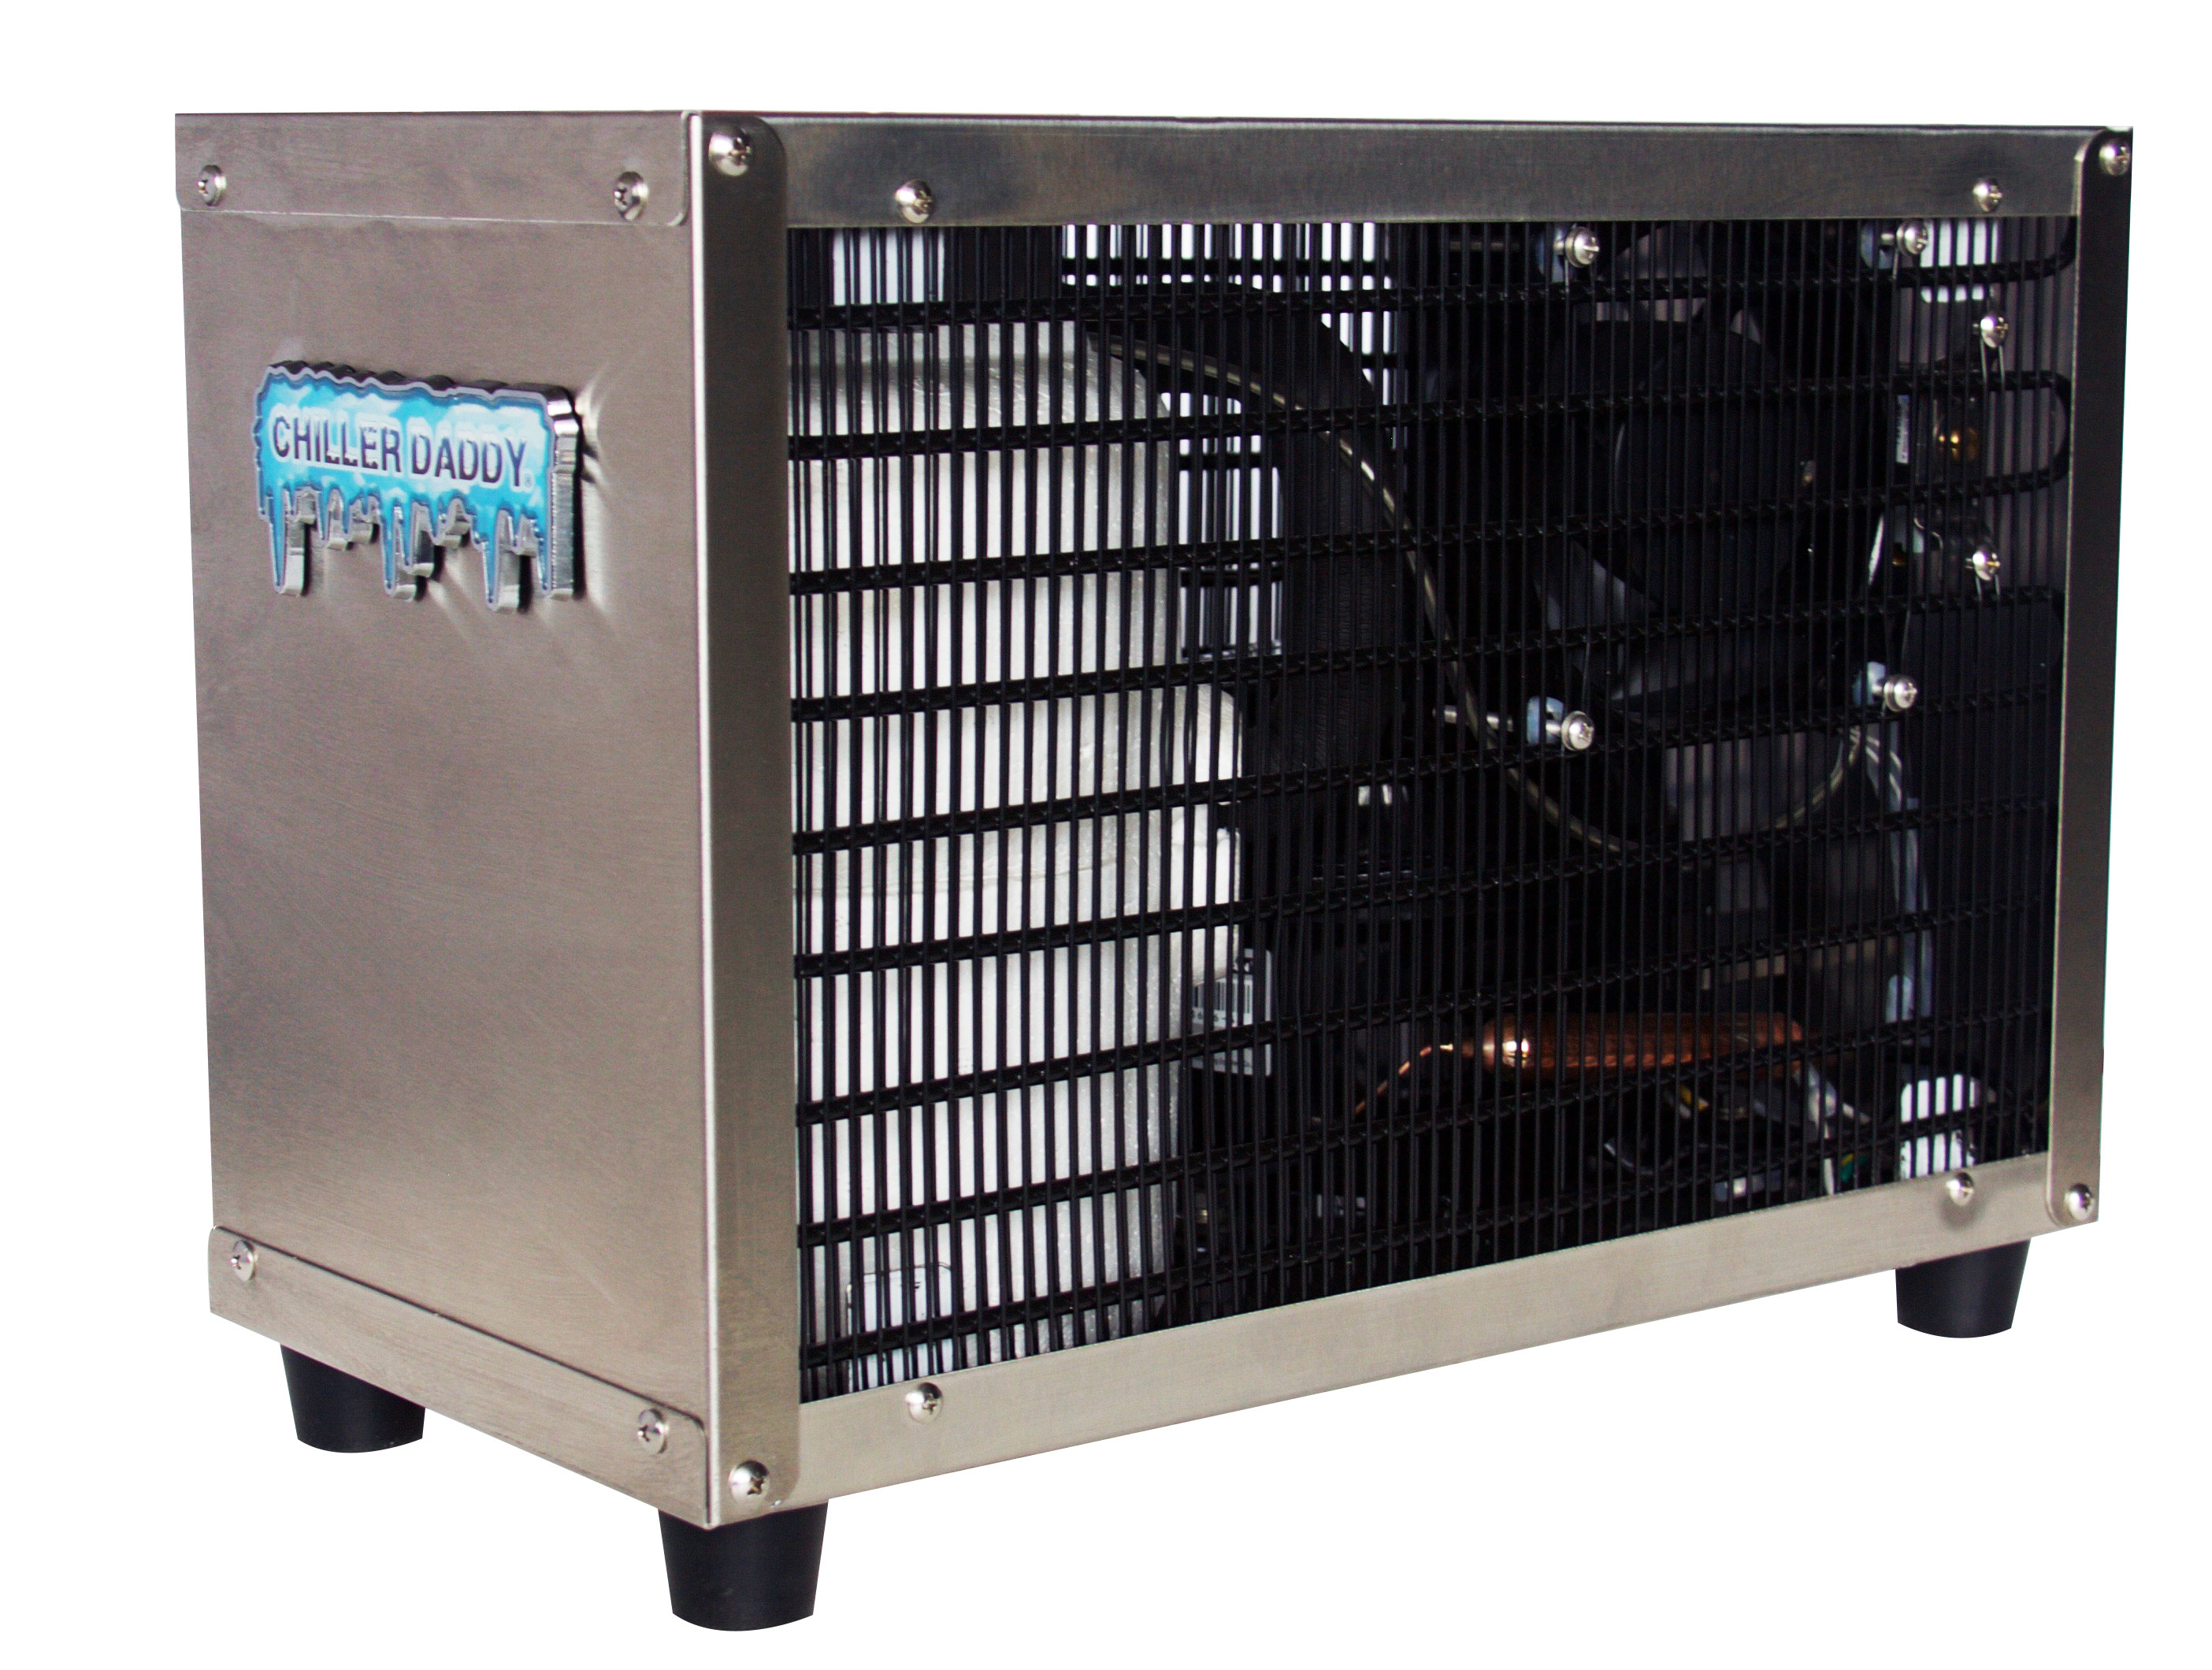 Chiller Daddy under counter water chiller SUS304 stainless steel under counter water chiller is perfect for reverse osmosis RO drinking water systems